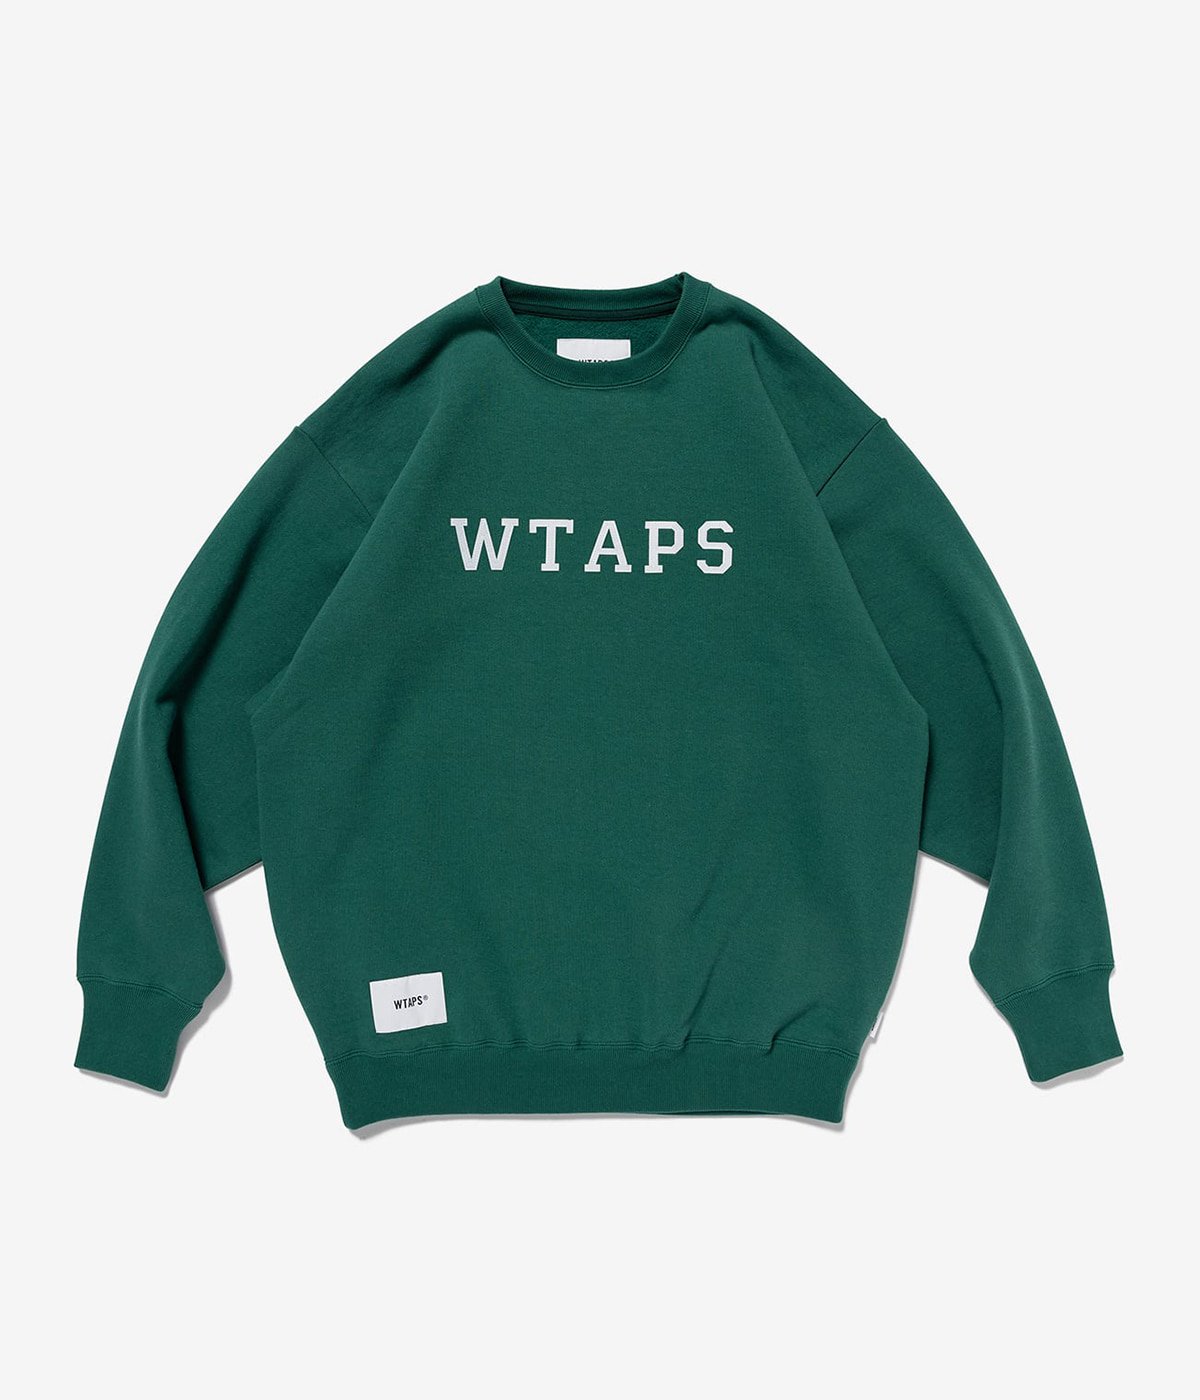 ACADEMY / SWEATER / COTTON. COLLEGE | WTAPS(ダブルタップス 